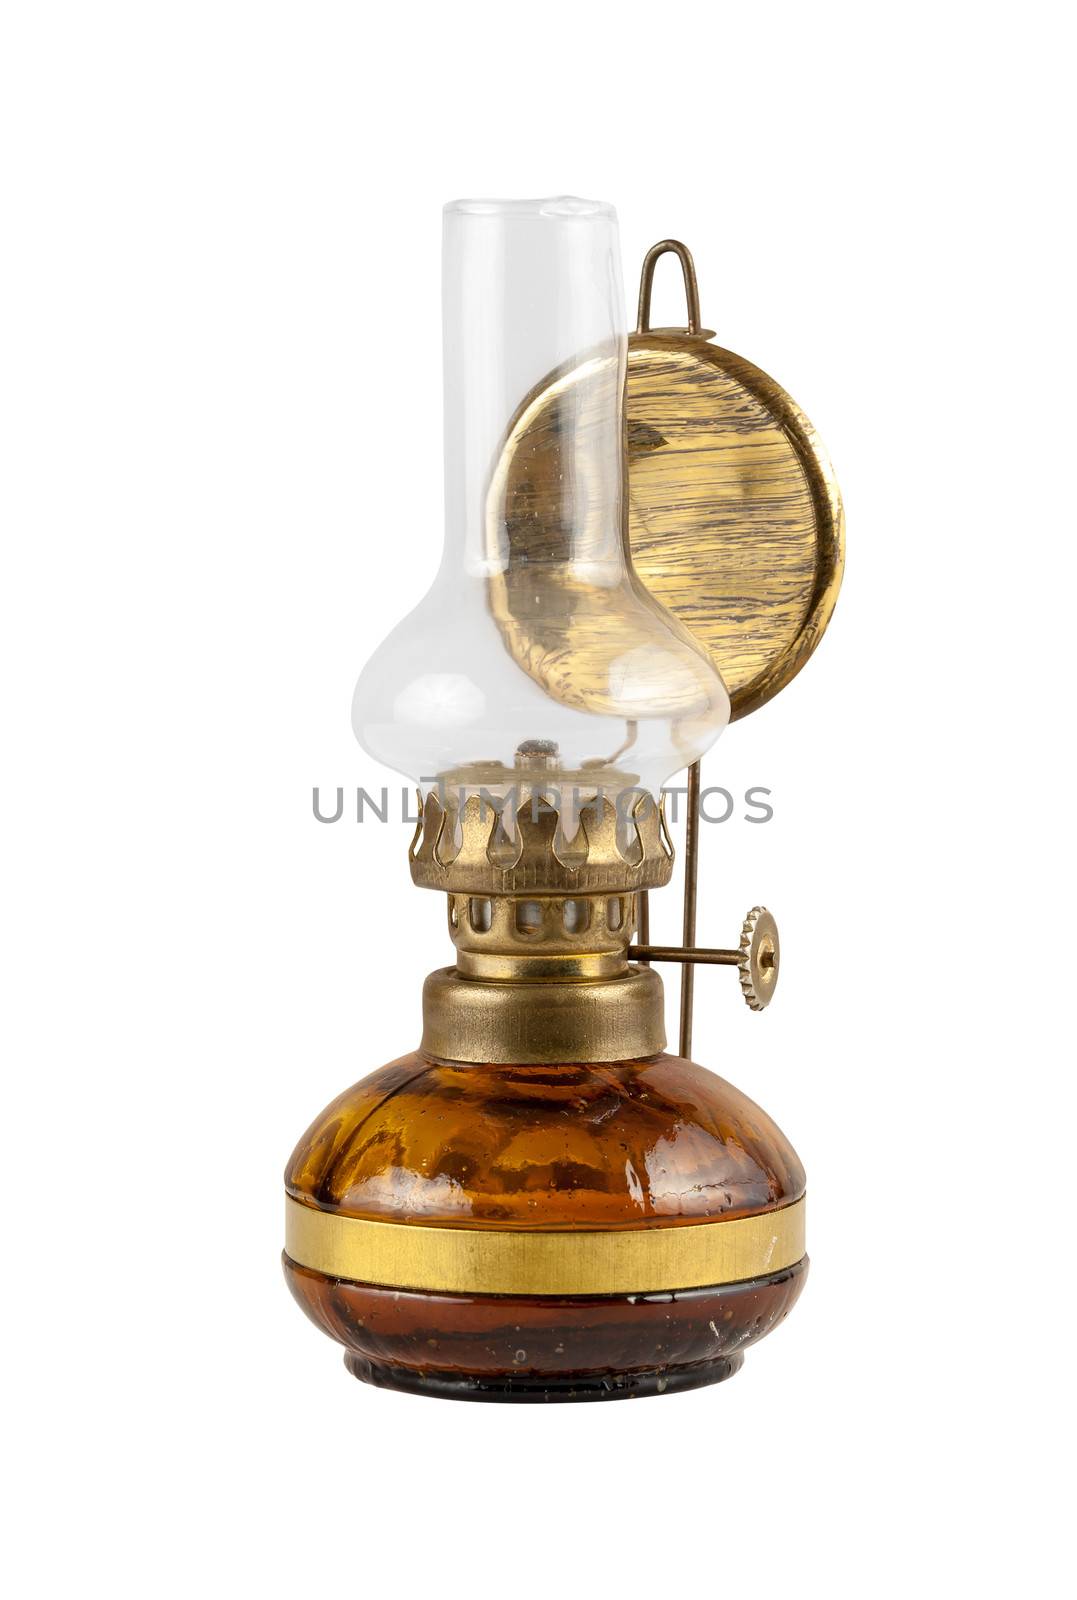 Old kerosene lamp isolated on white background with clipping path